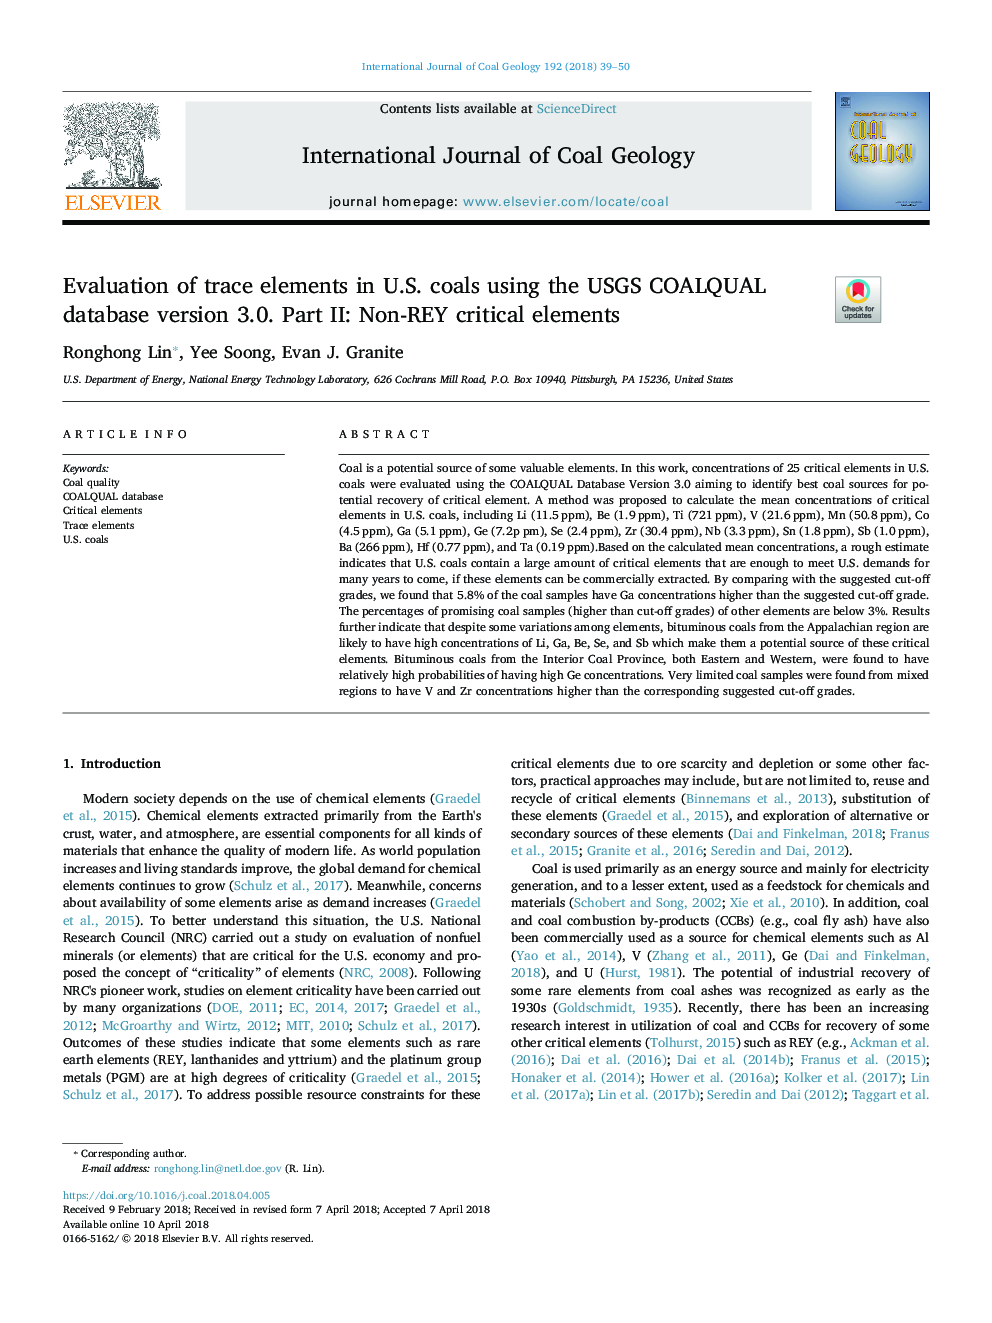 Evaluation of trace elements in U.S. coals using the USGS COALQUAL database version 3.0. Part II: Non-REY critical elements